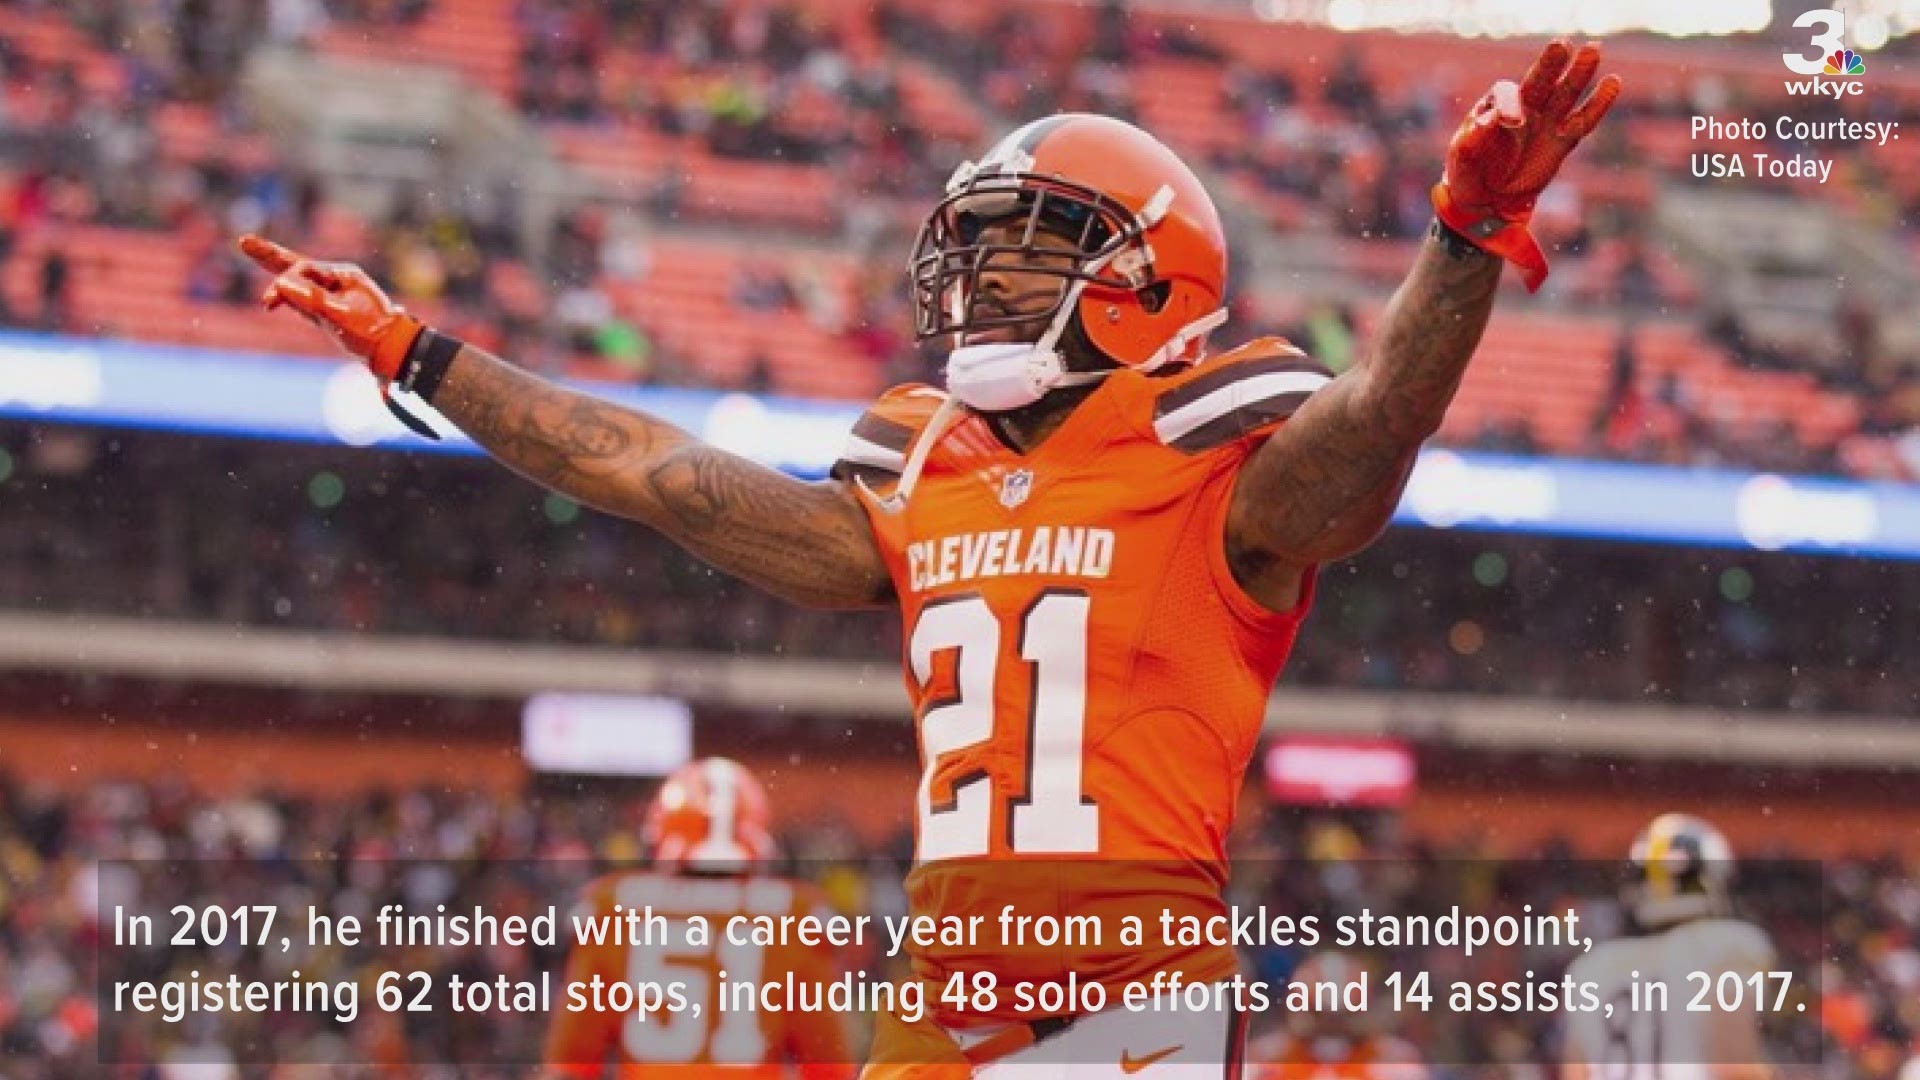 The Cleveland Browns are finalizing the trade of cornerback Jamar Taylor to the Arizona Cardinals.